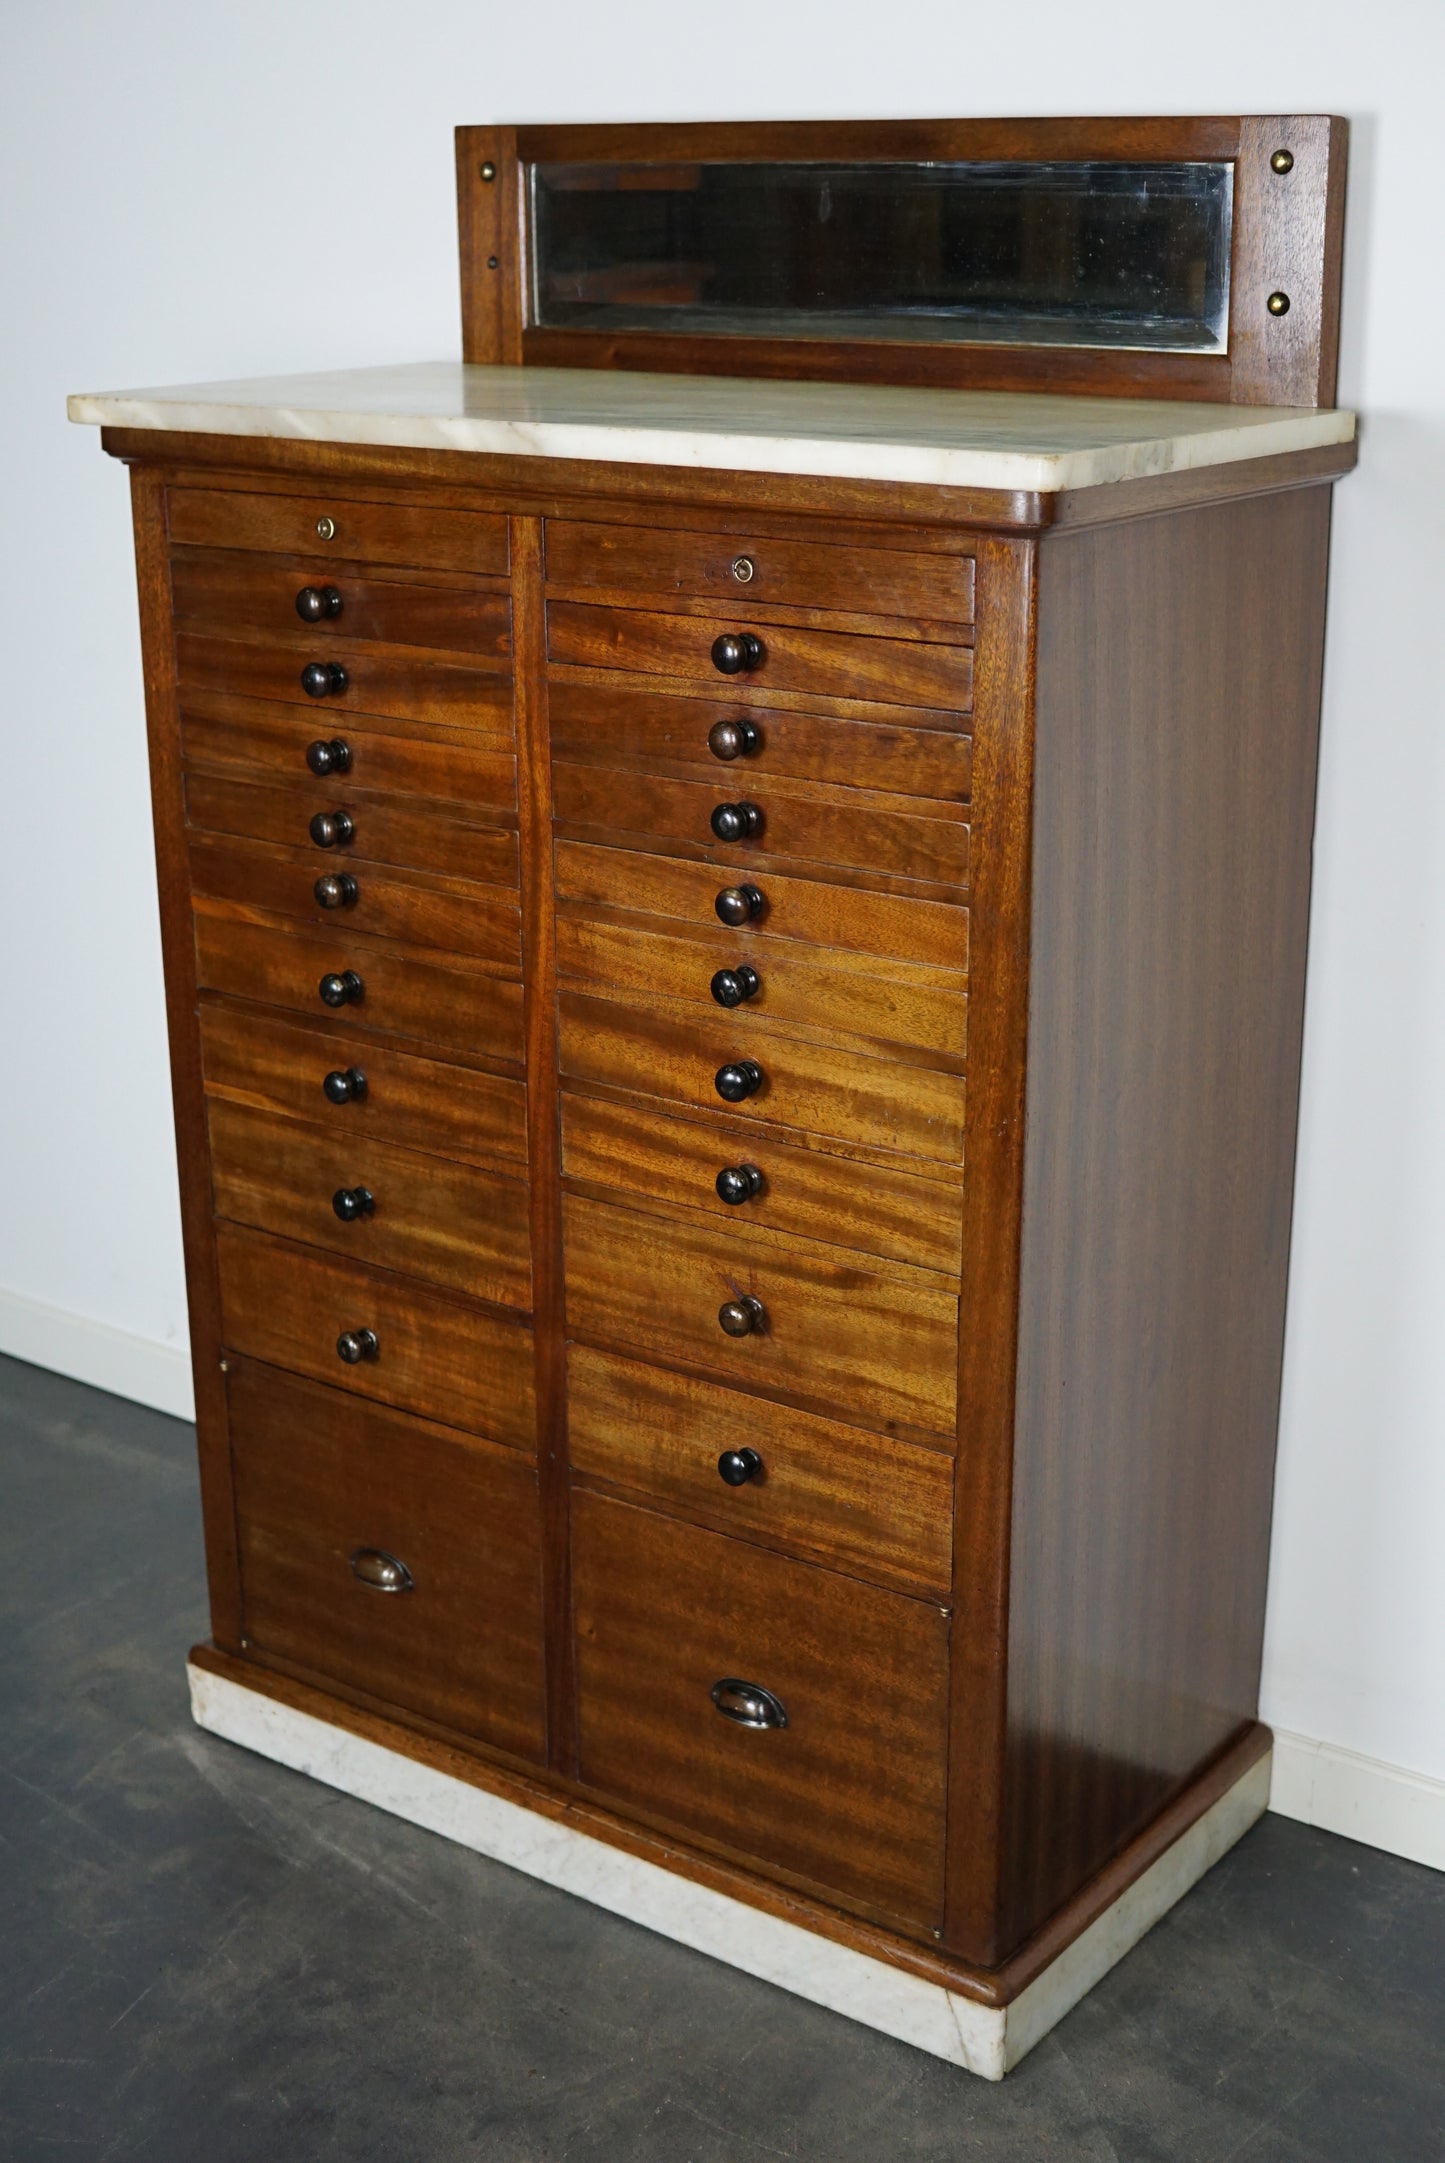 Antique Mahogany and Marble Dental / Dentist Cabinet, Amsterdam ca 1920